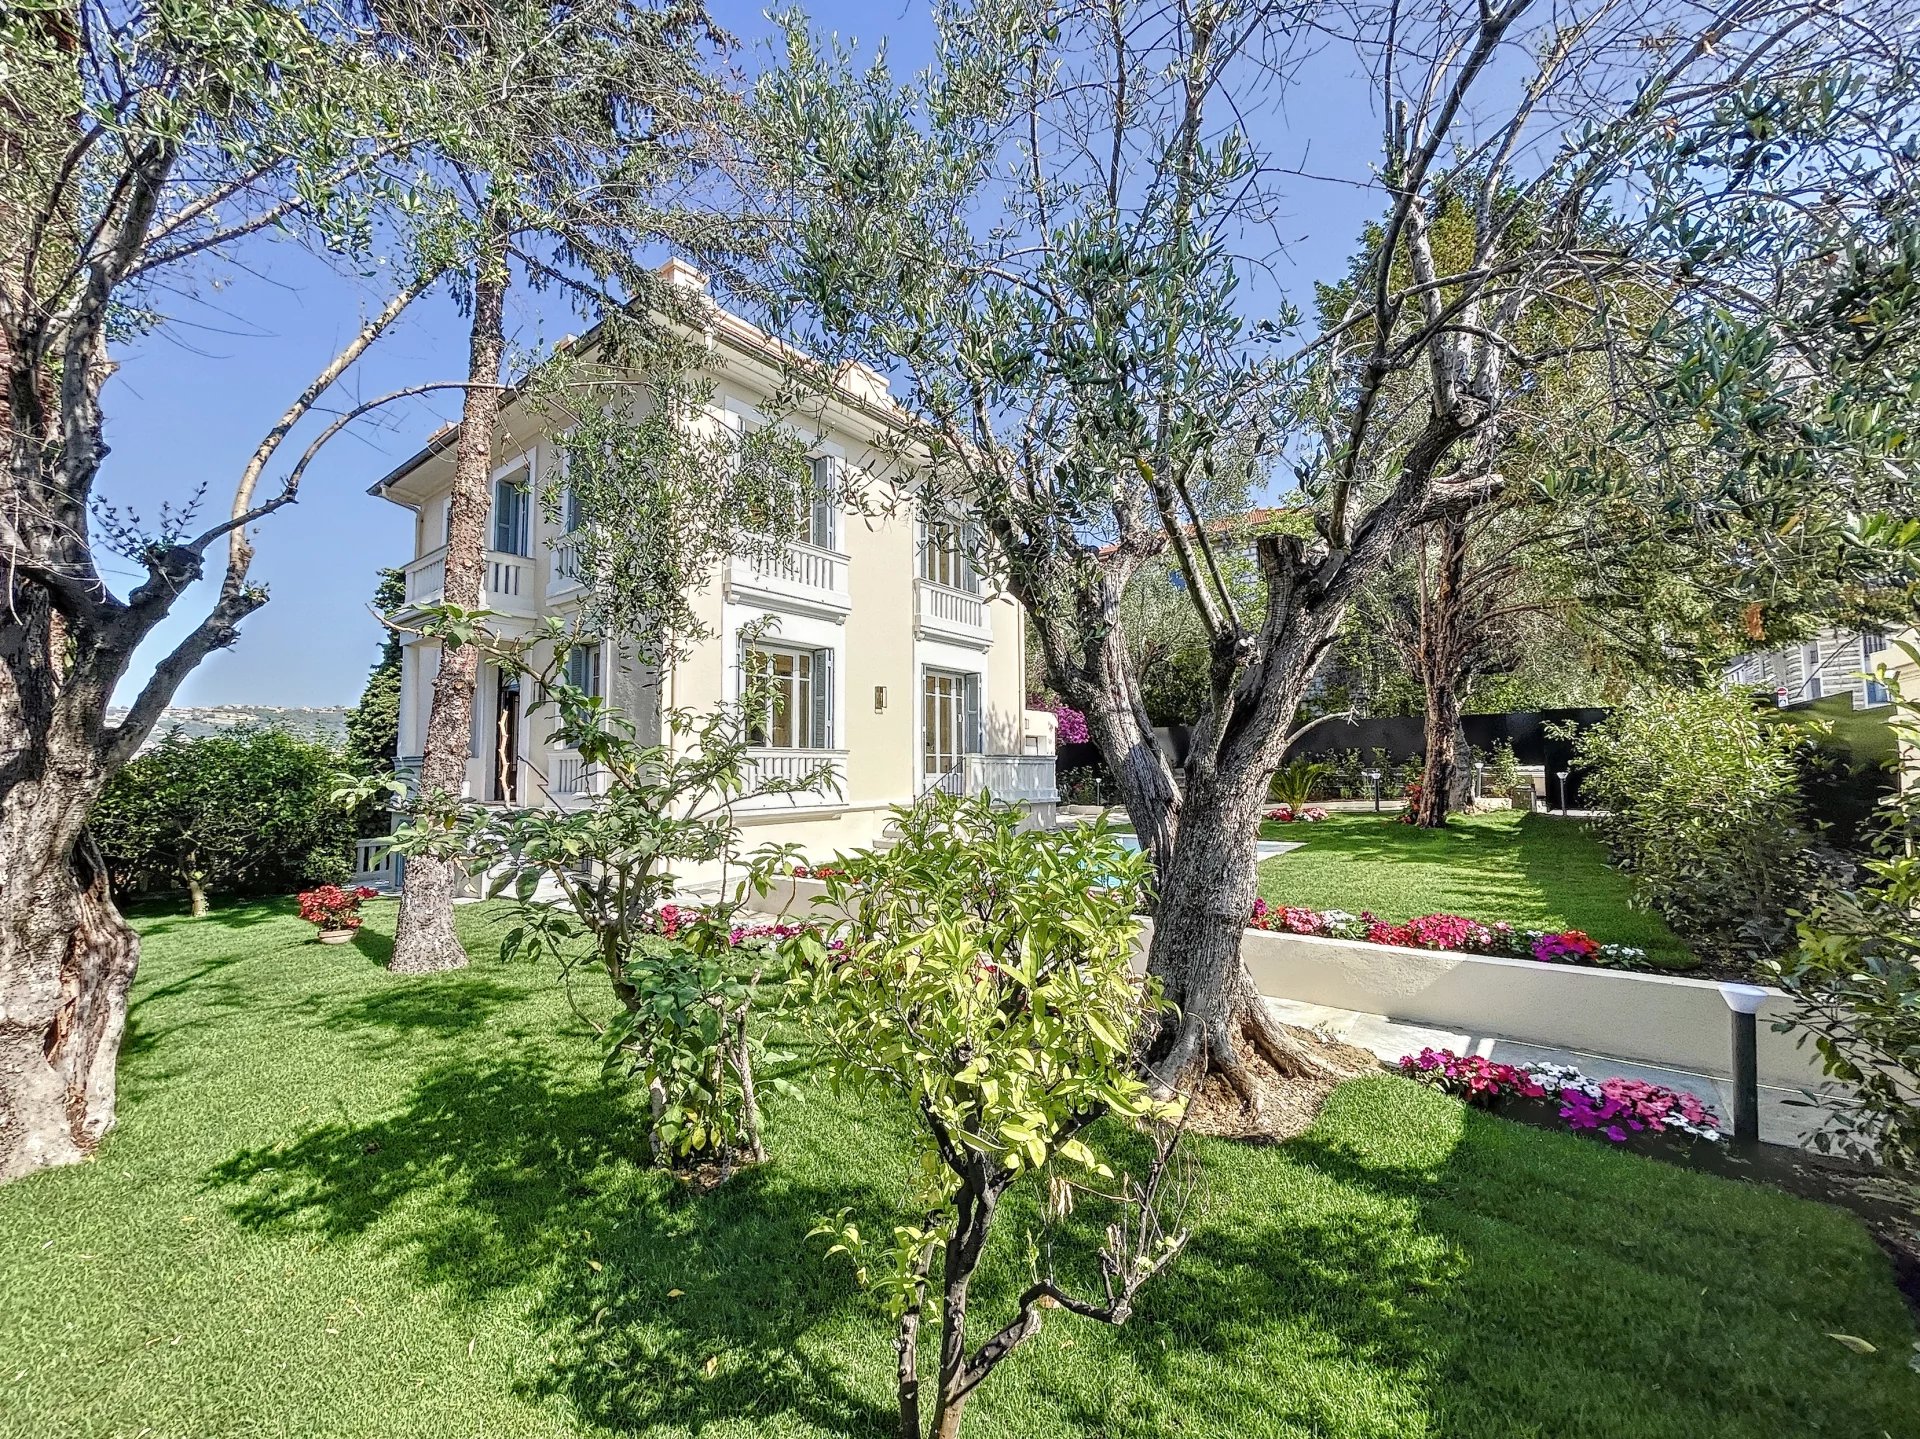 7-ROOM HOUSE WITH SWIMMING POOL AND GARDEN